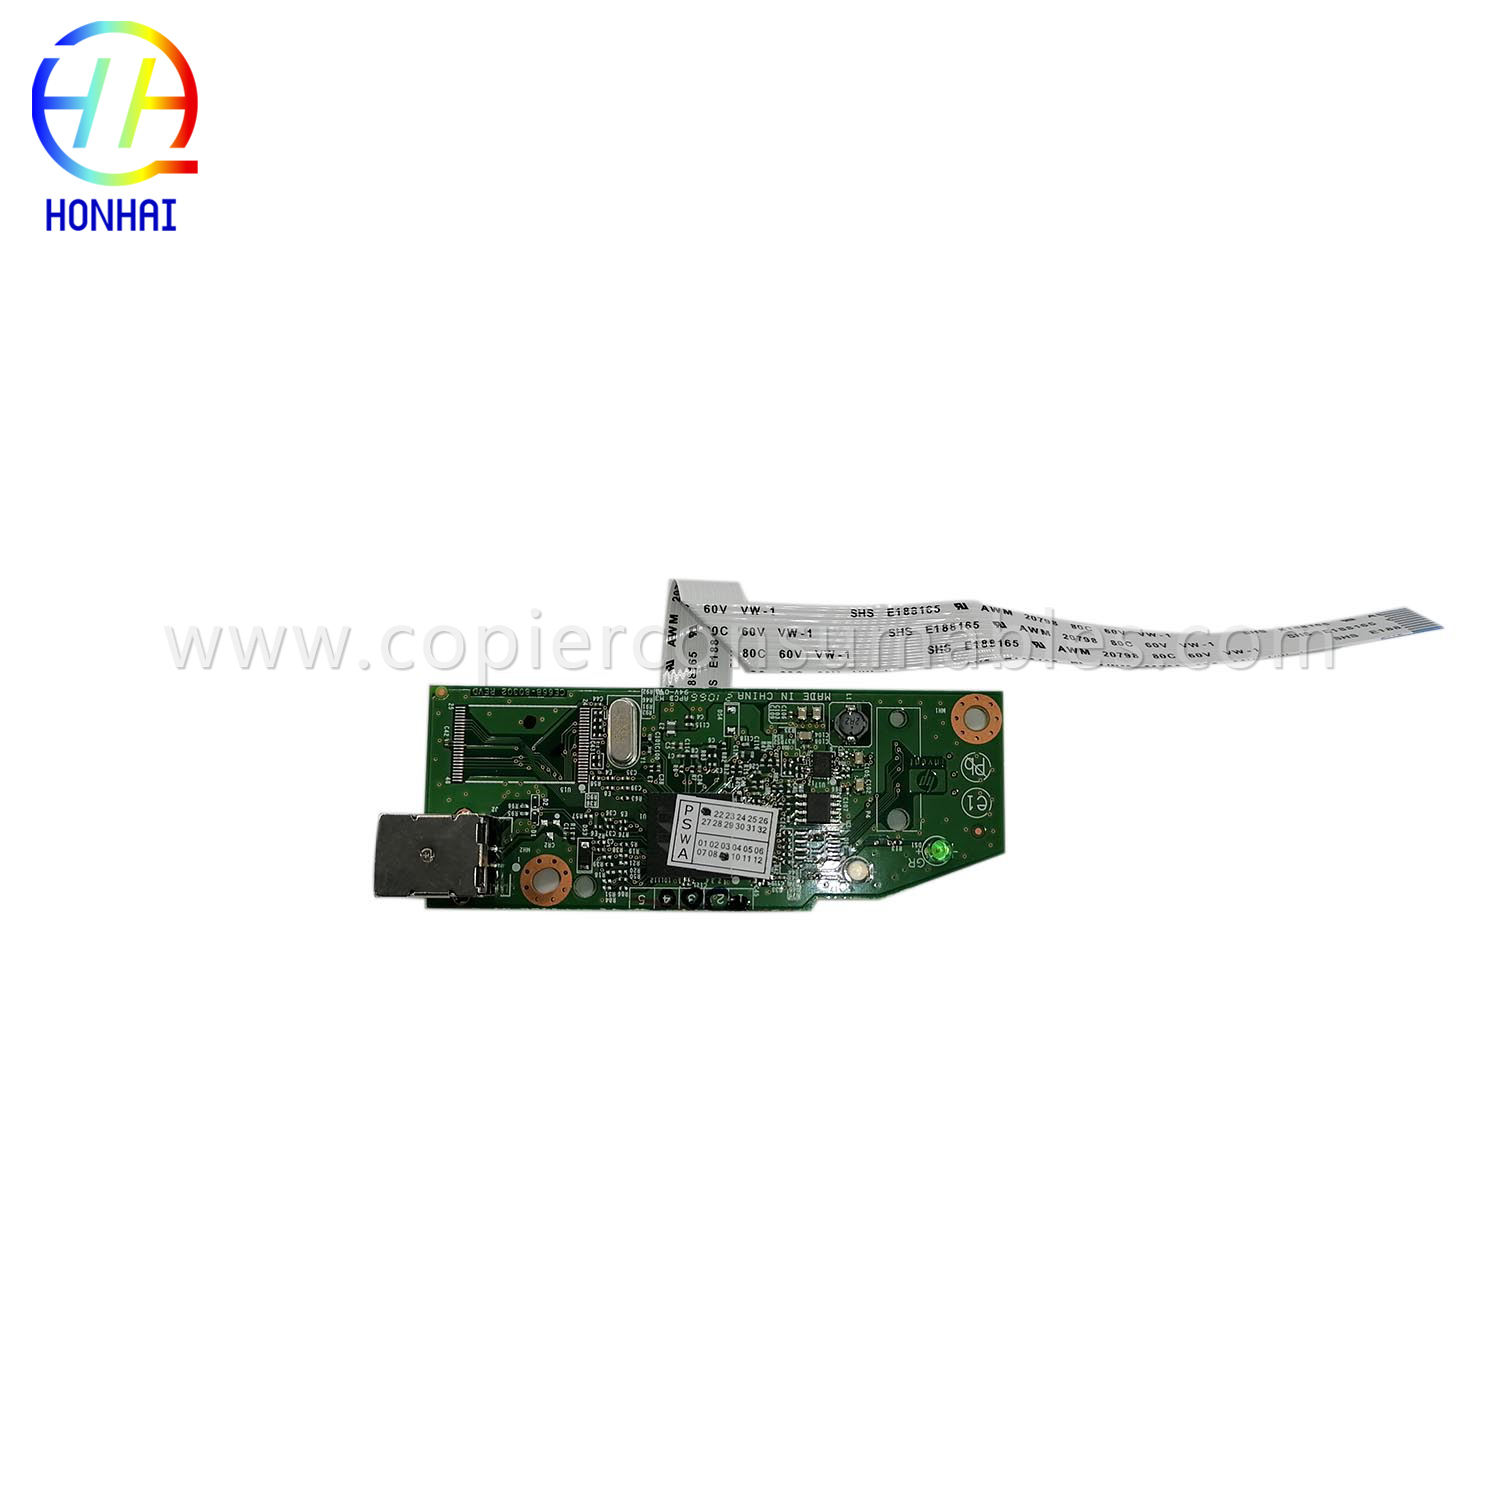 MAIN BOARD FOR HP Laser jet 1102 RM1-7600-020CN (1) 拷贝